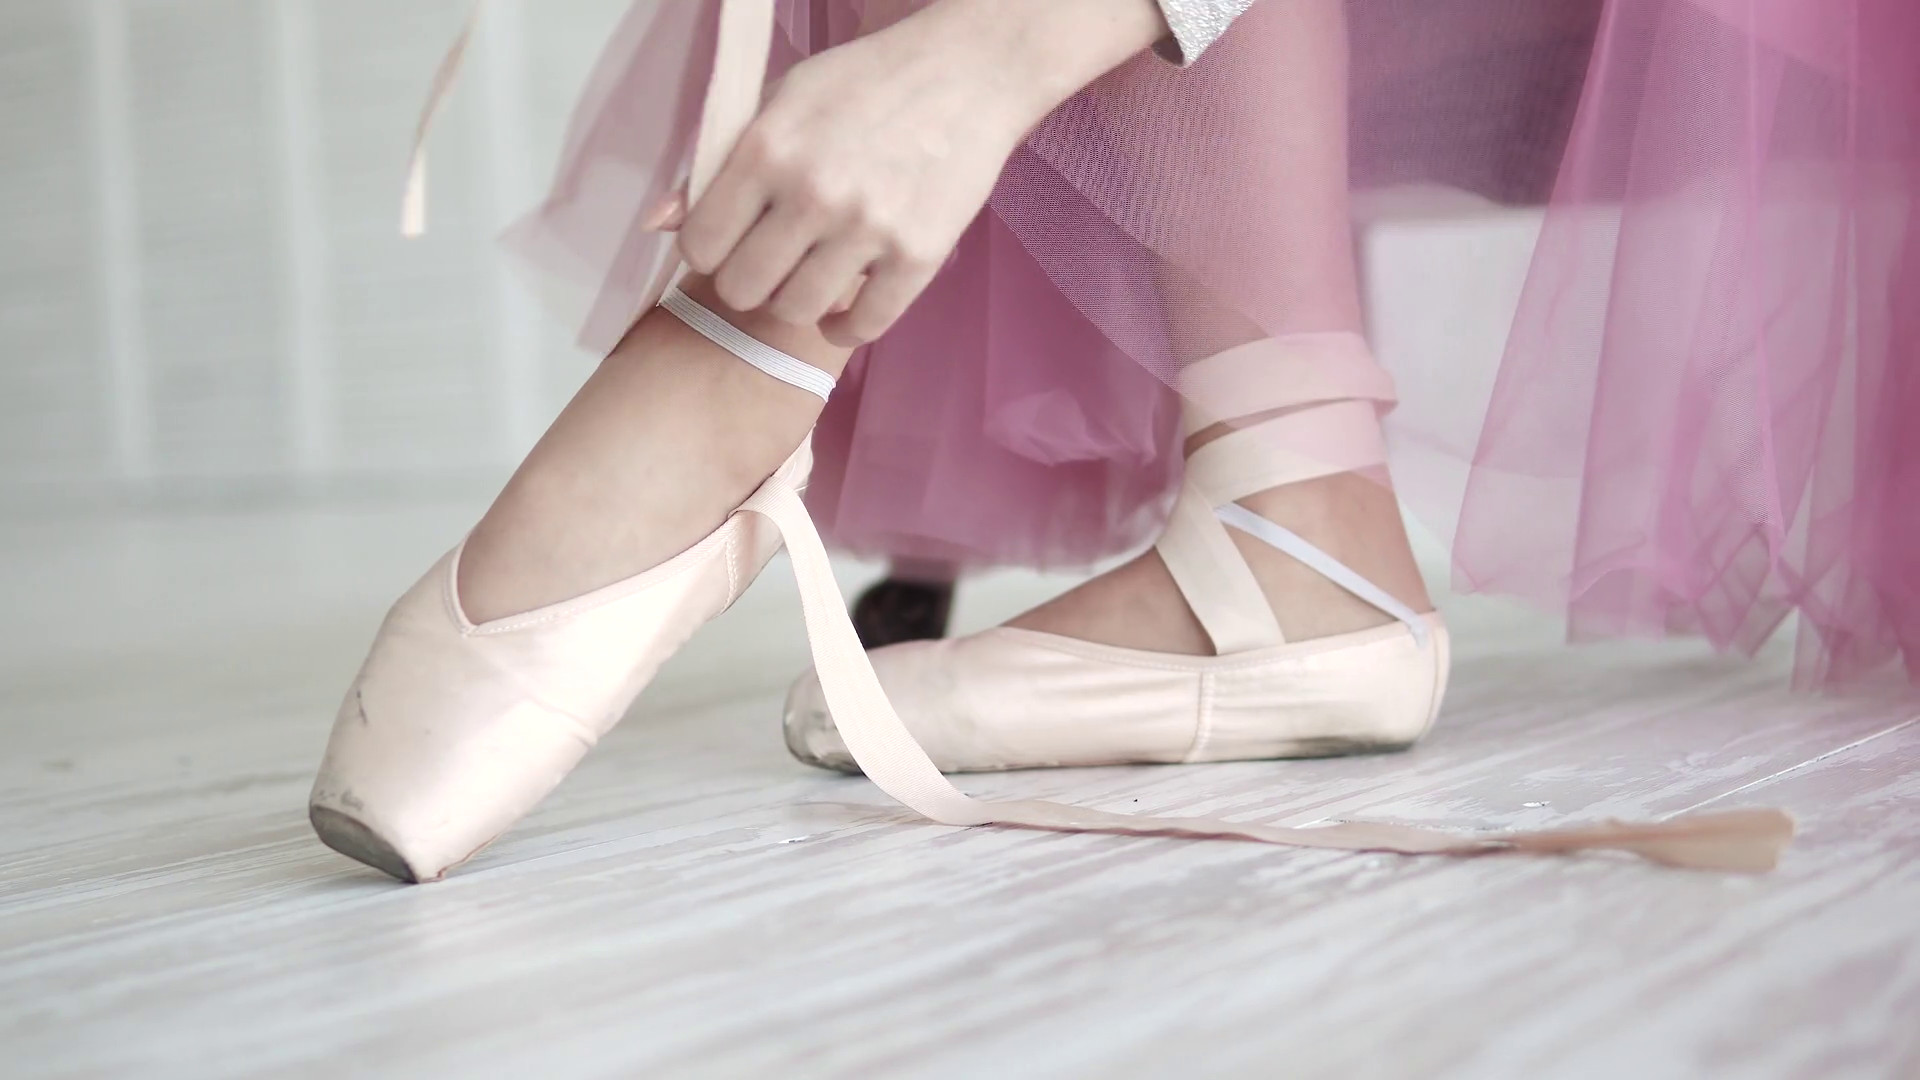 Ballerina Tying The Pointes - Ballet Shoes - HD Wallpaper 